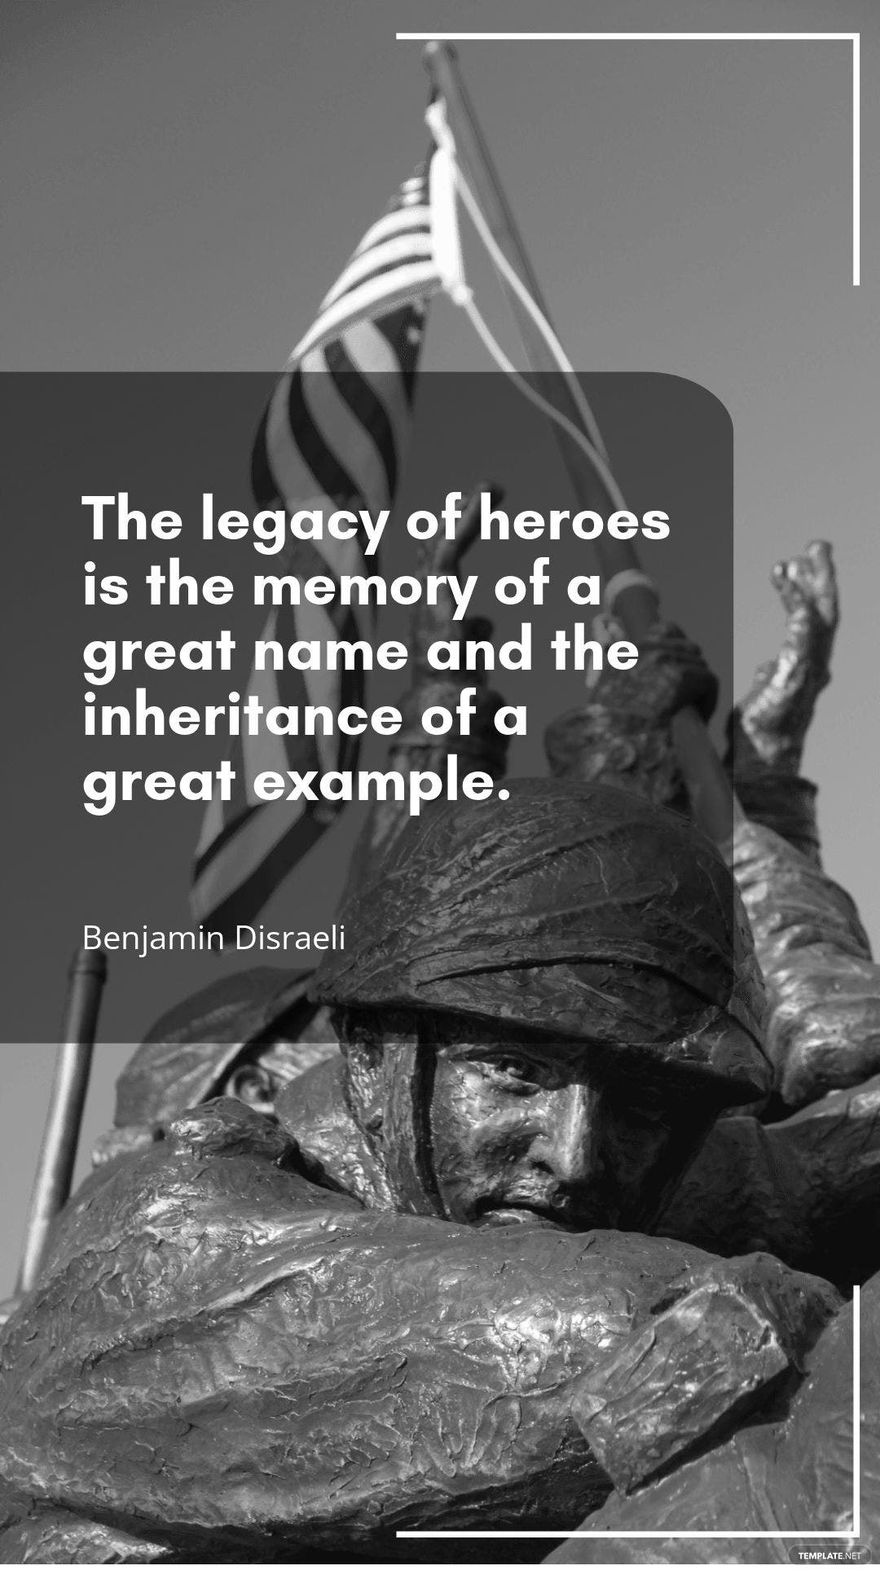 Benjamin Disraeli - The legacy of heroes is the memory of a great name and the inheritance of a great example.